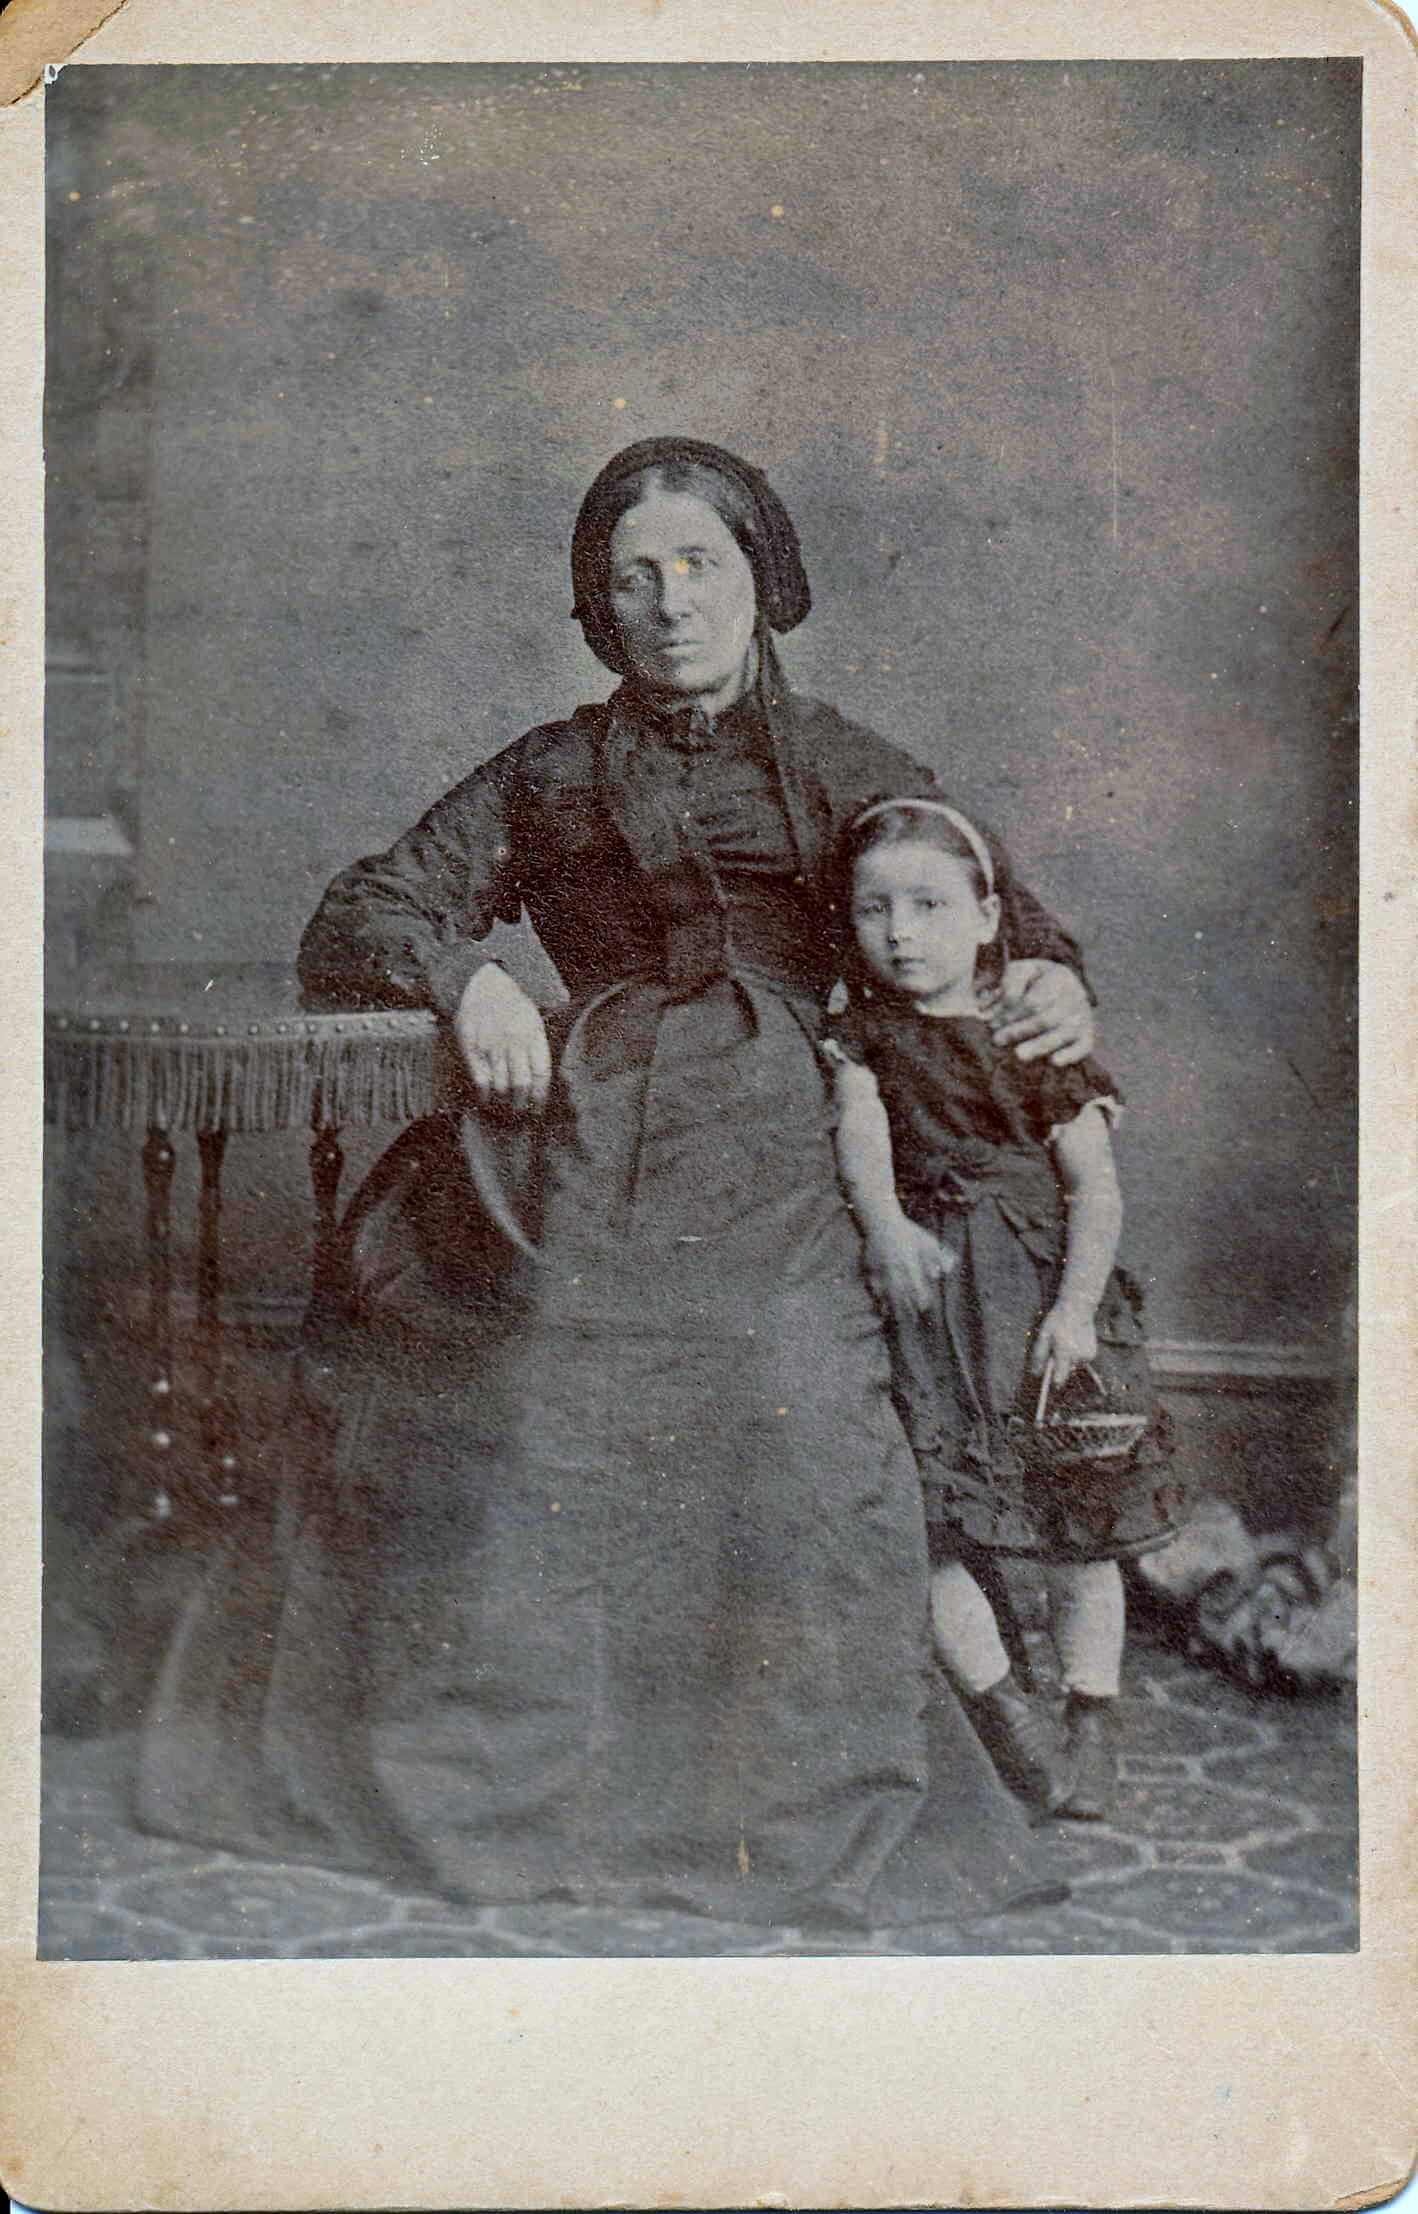 annie-caroline-fisher-1867-1938-born-on-combe-down-and-her-mother-mary-hibberd-1838-1902